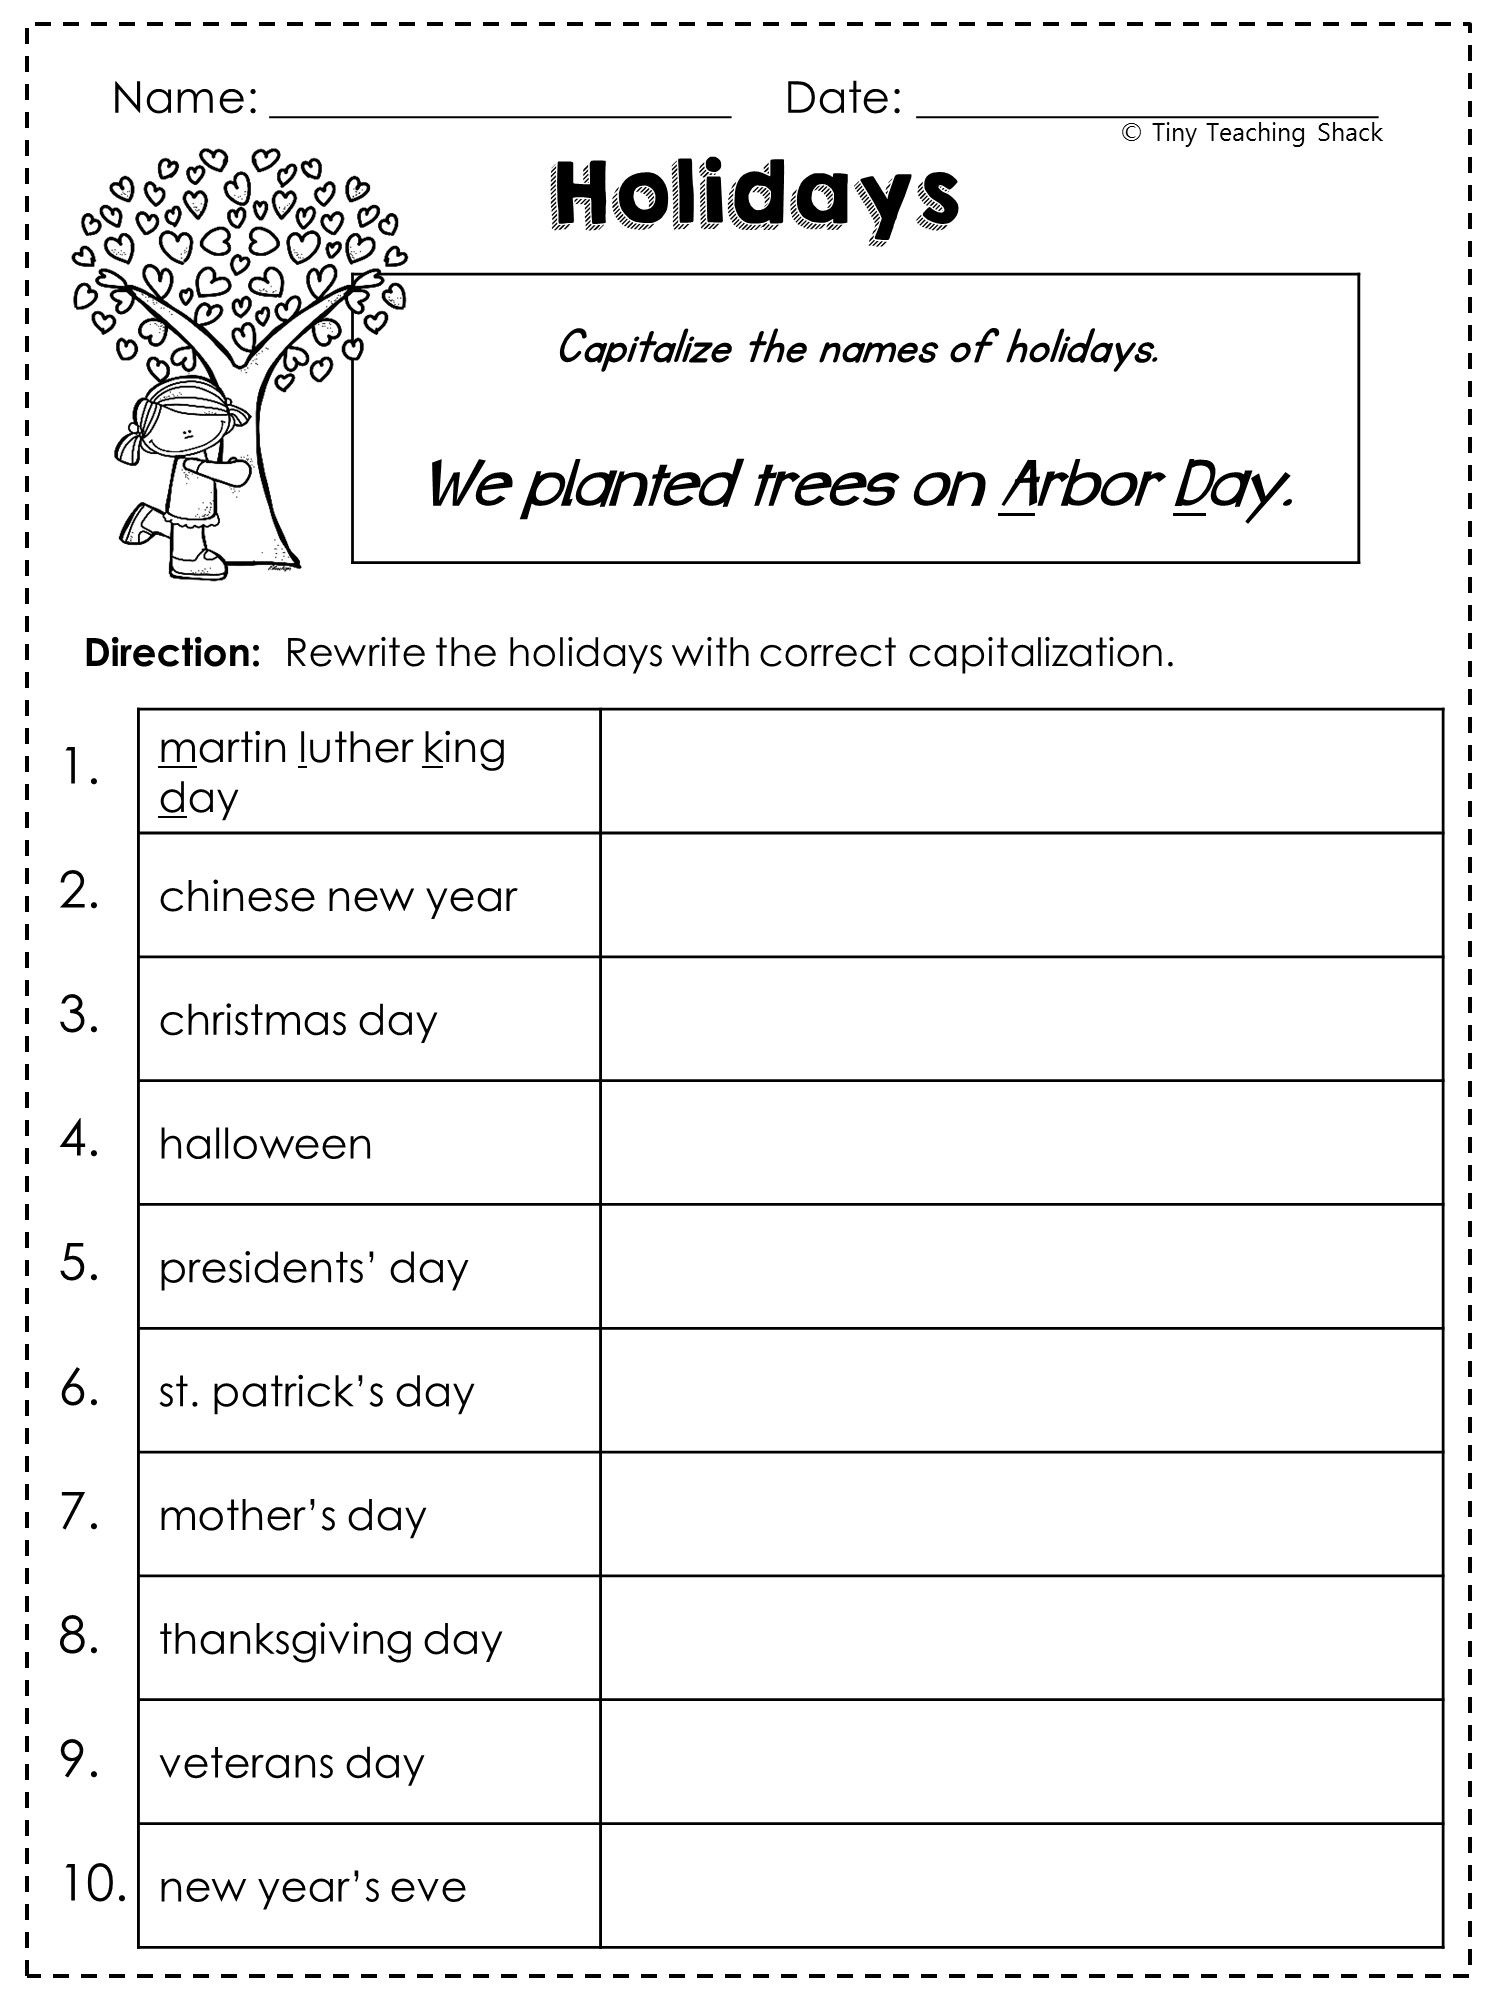 Teach Child How To Read Free Printable Capitalization Worksheets For 